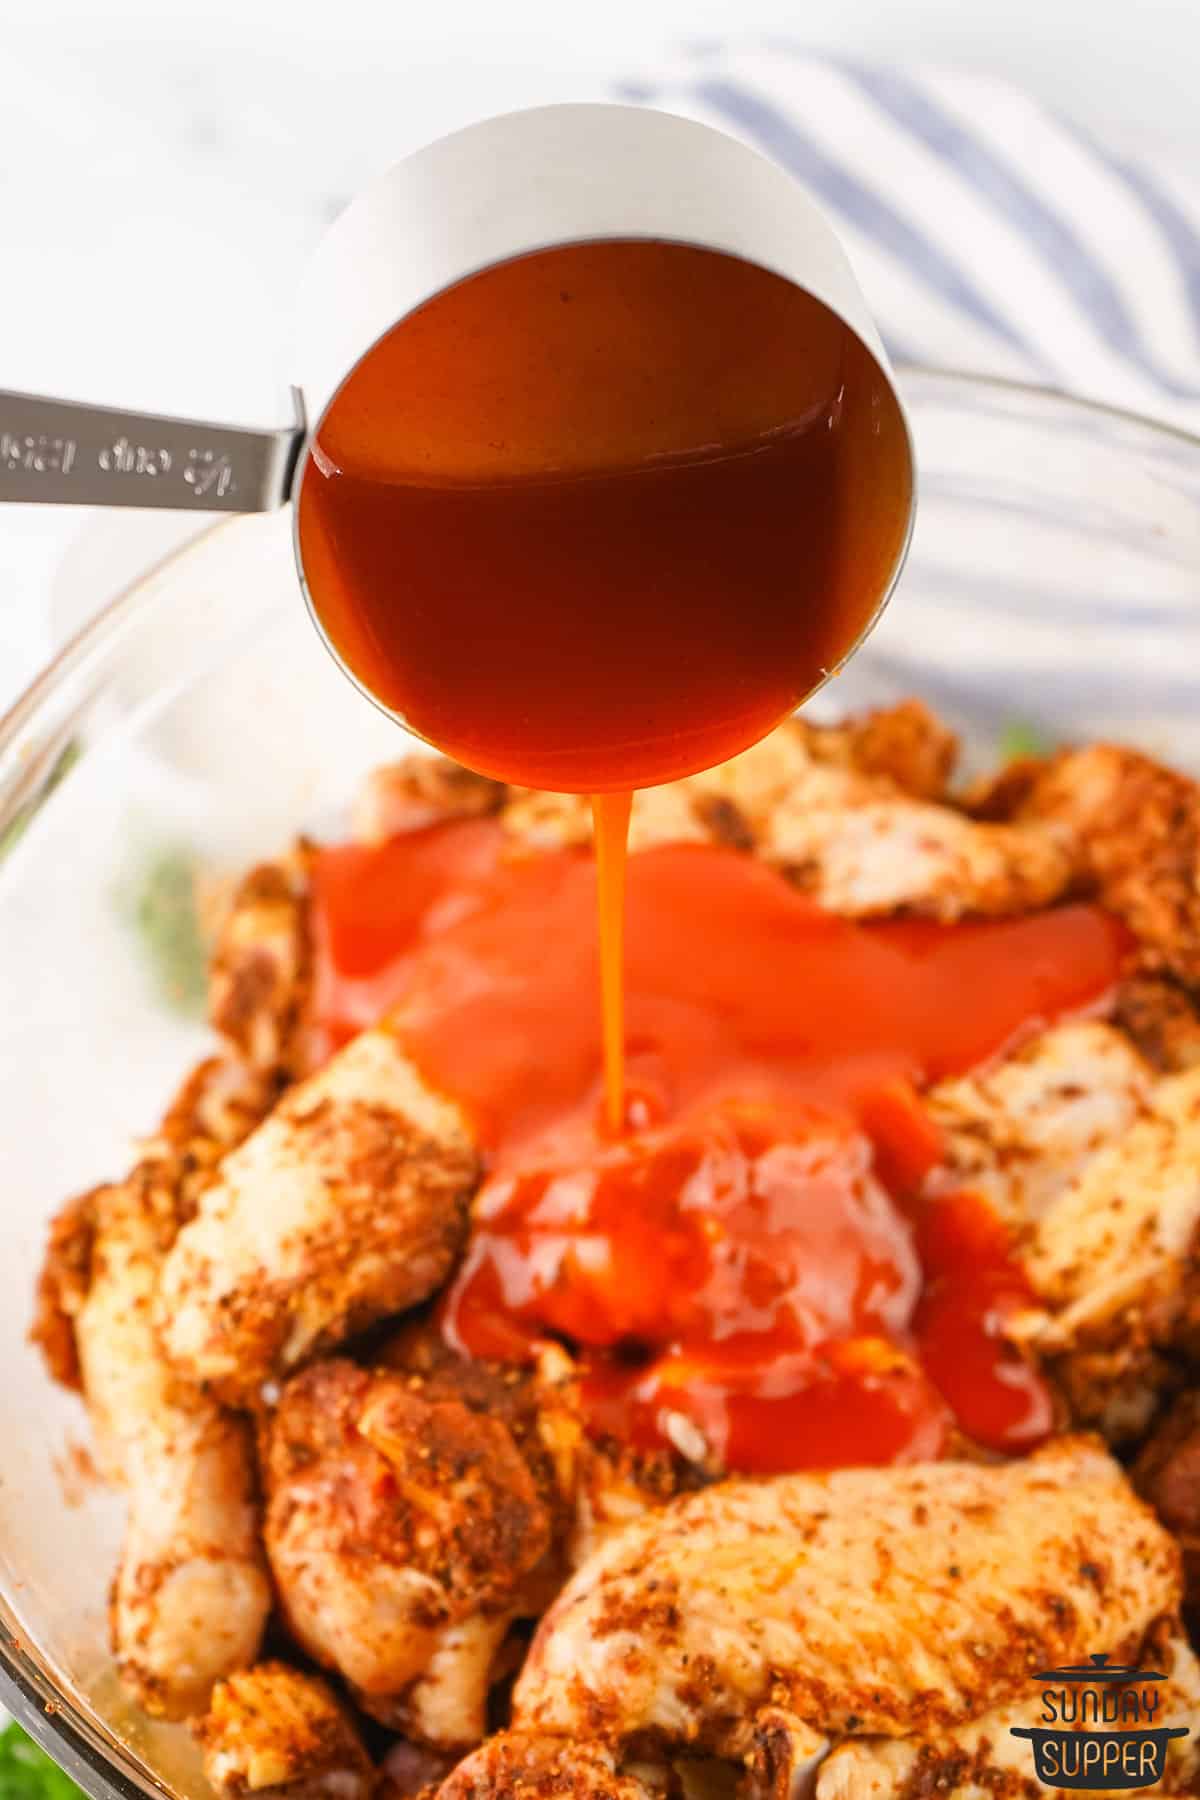 hot sauce being added to the seasoned chicken